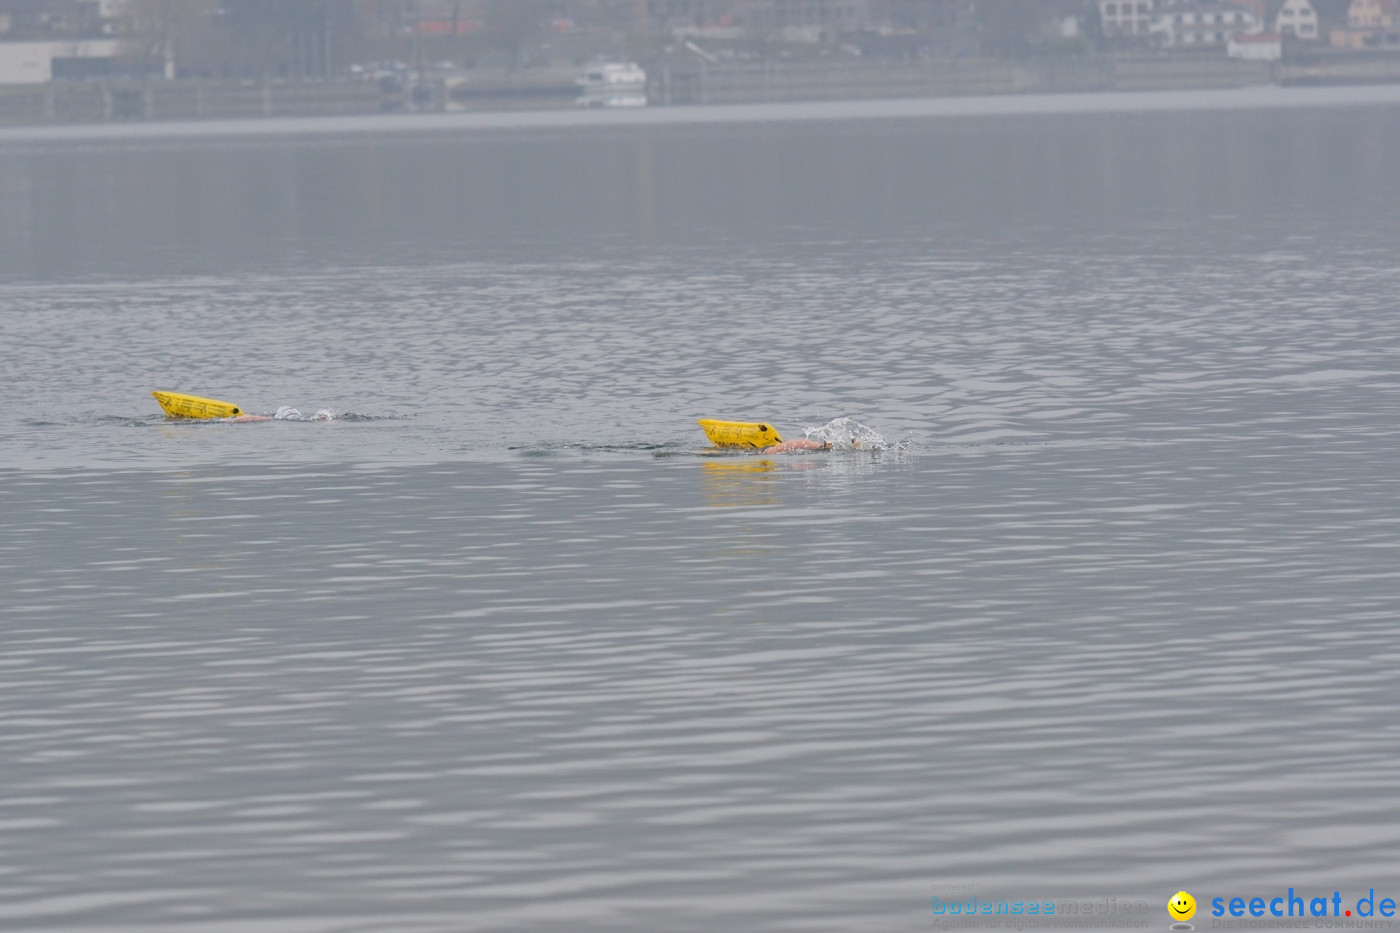 Lake Constance Eisman by Aqua Sphere: Ludwigshafen am Bodensee, 11.02.2017